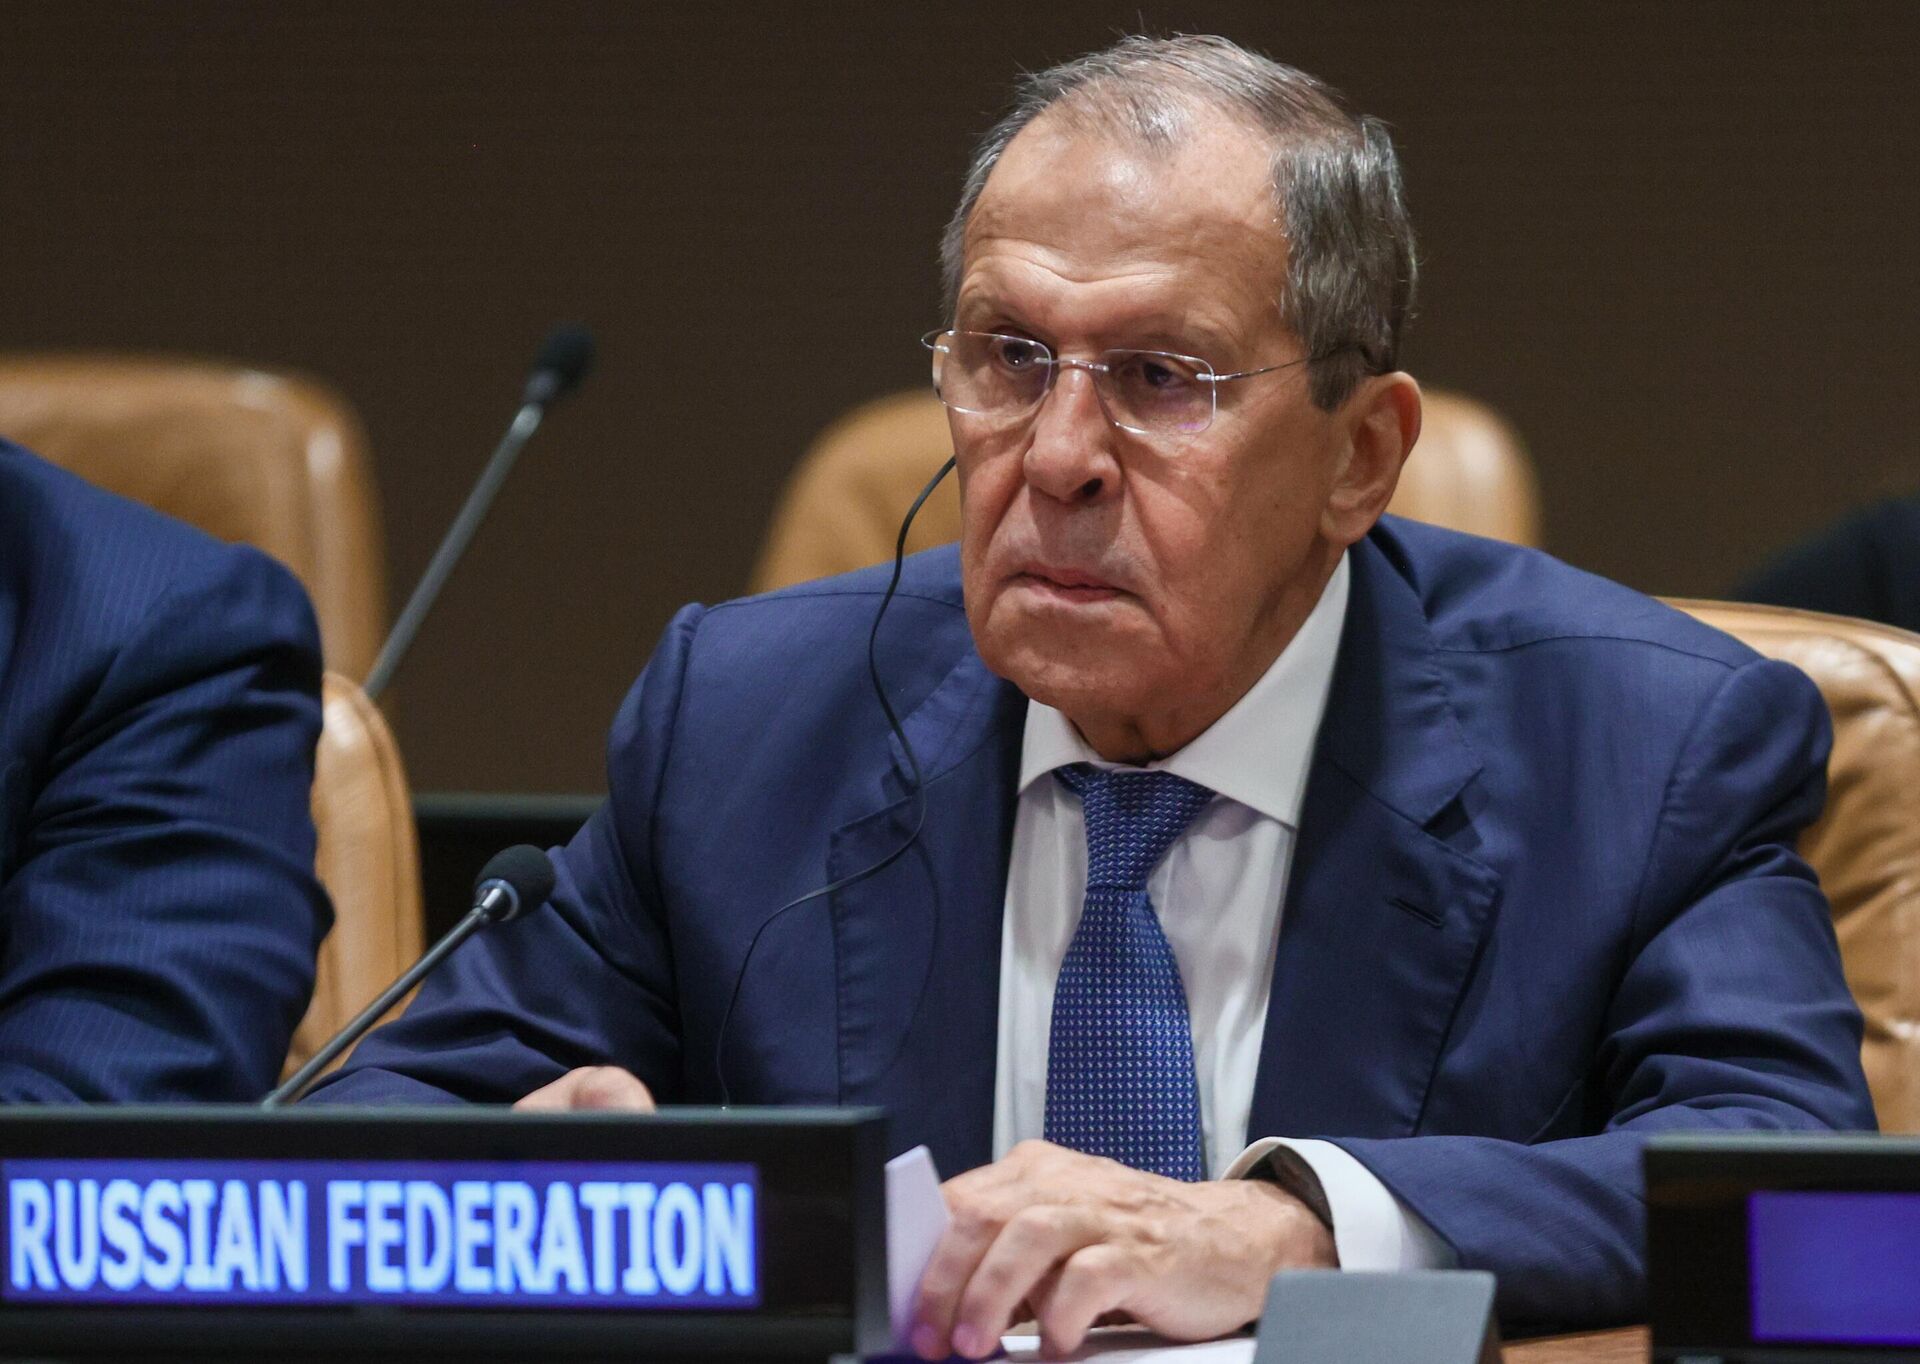 Russian Foreign Minister Sergei Lavrov during a meeting with his Chinese counterpart during the 77th session of the United Nations General Assembly in New York. - Sputnik International, 1920, 13.11.2022